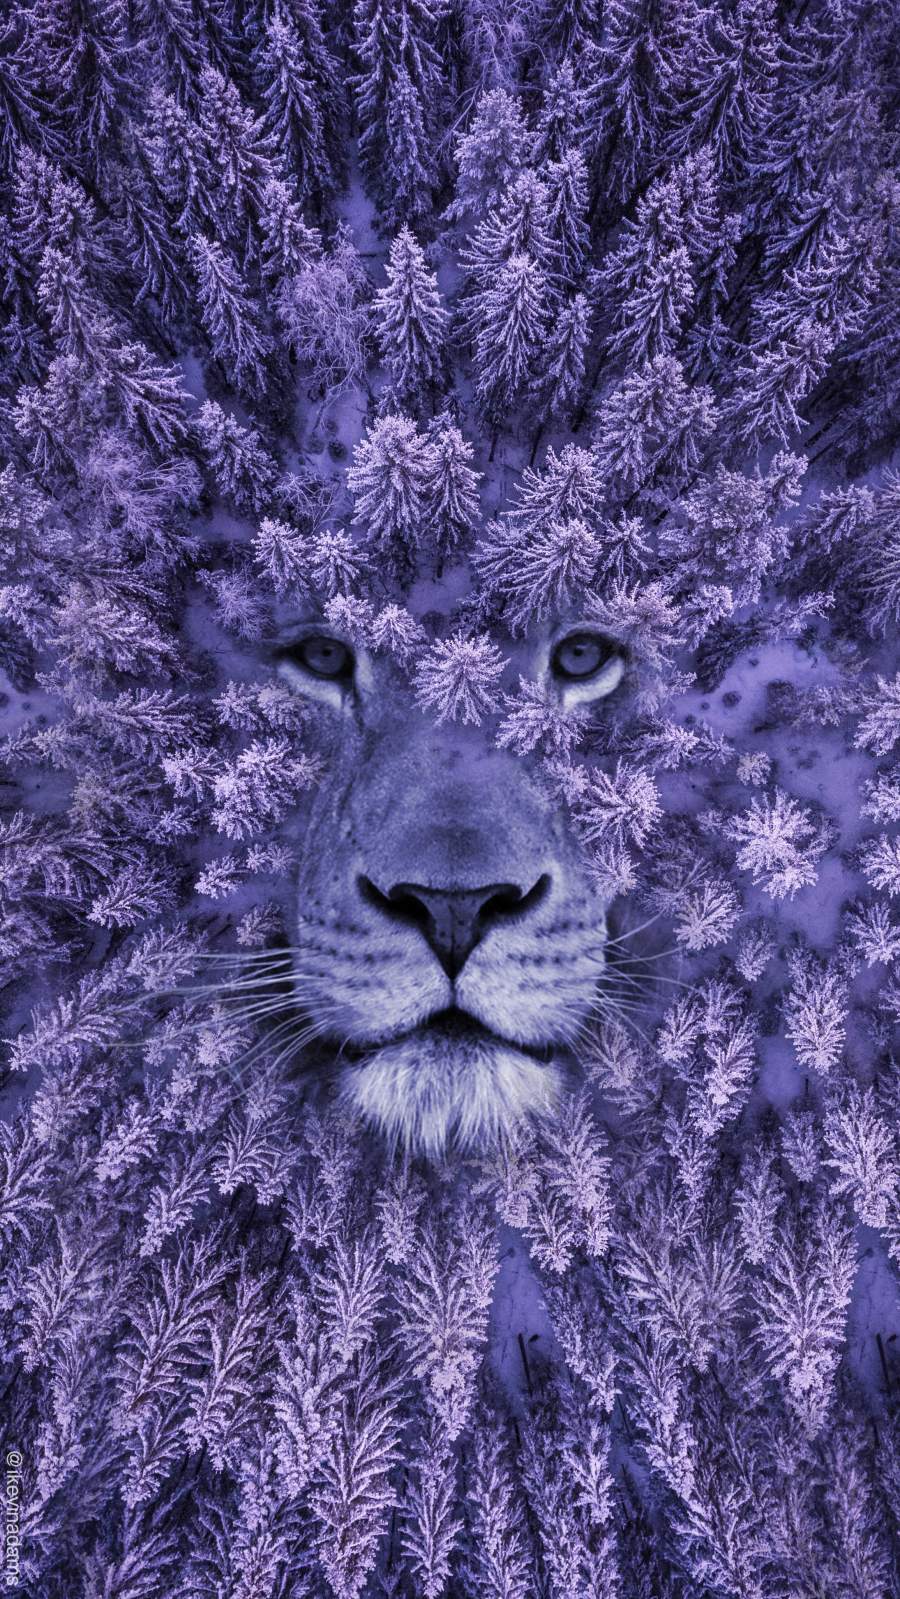 A lion's face in a forest of purple trees - Lion